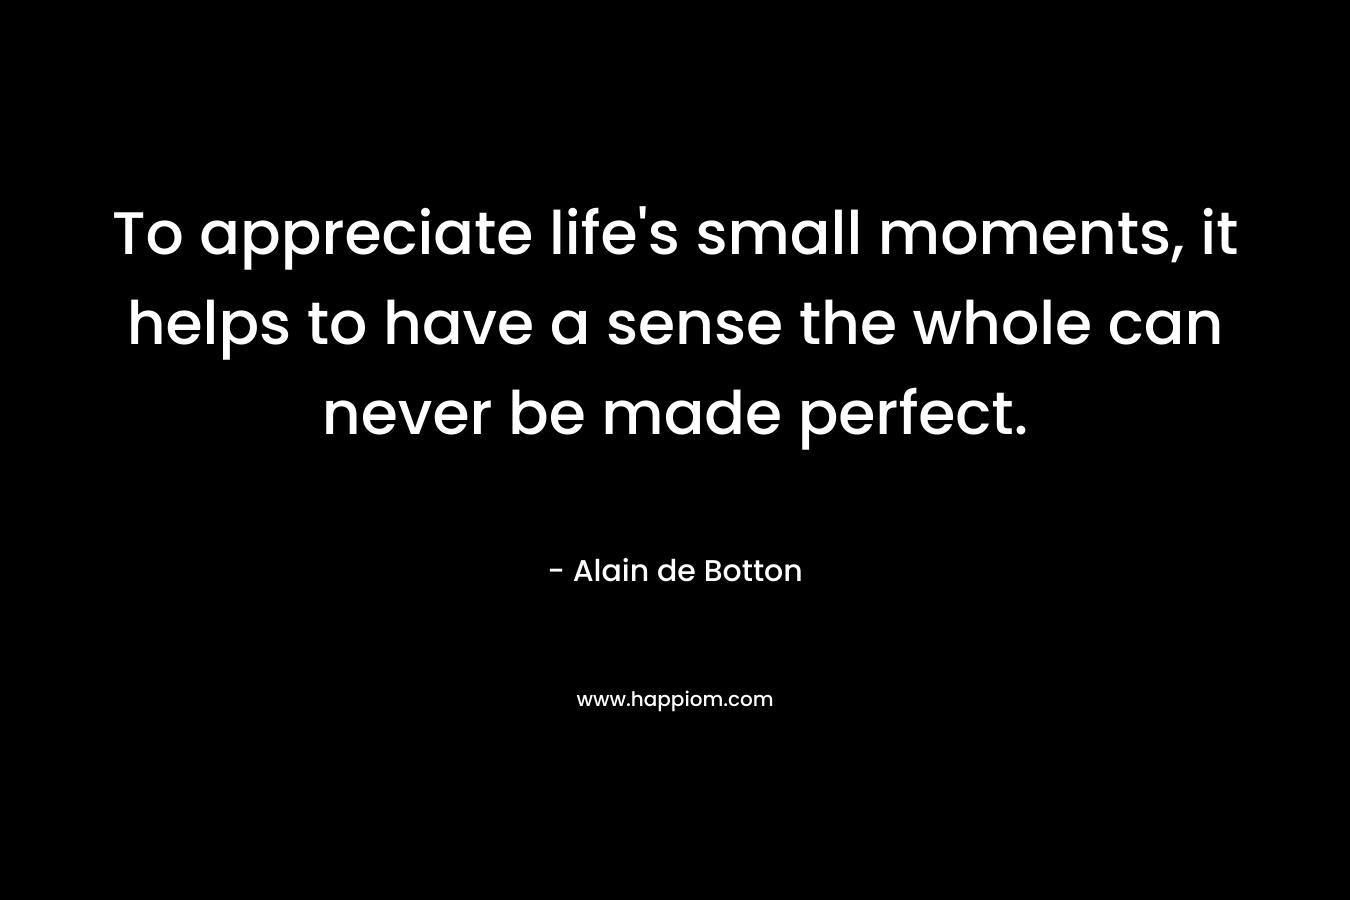 To appreciate life’s small moments, it helps to have a sense the whole can never be made perfect. – Alain de Botton